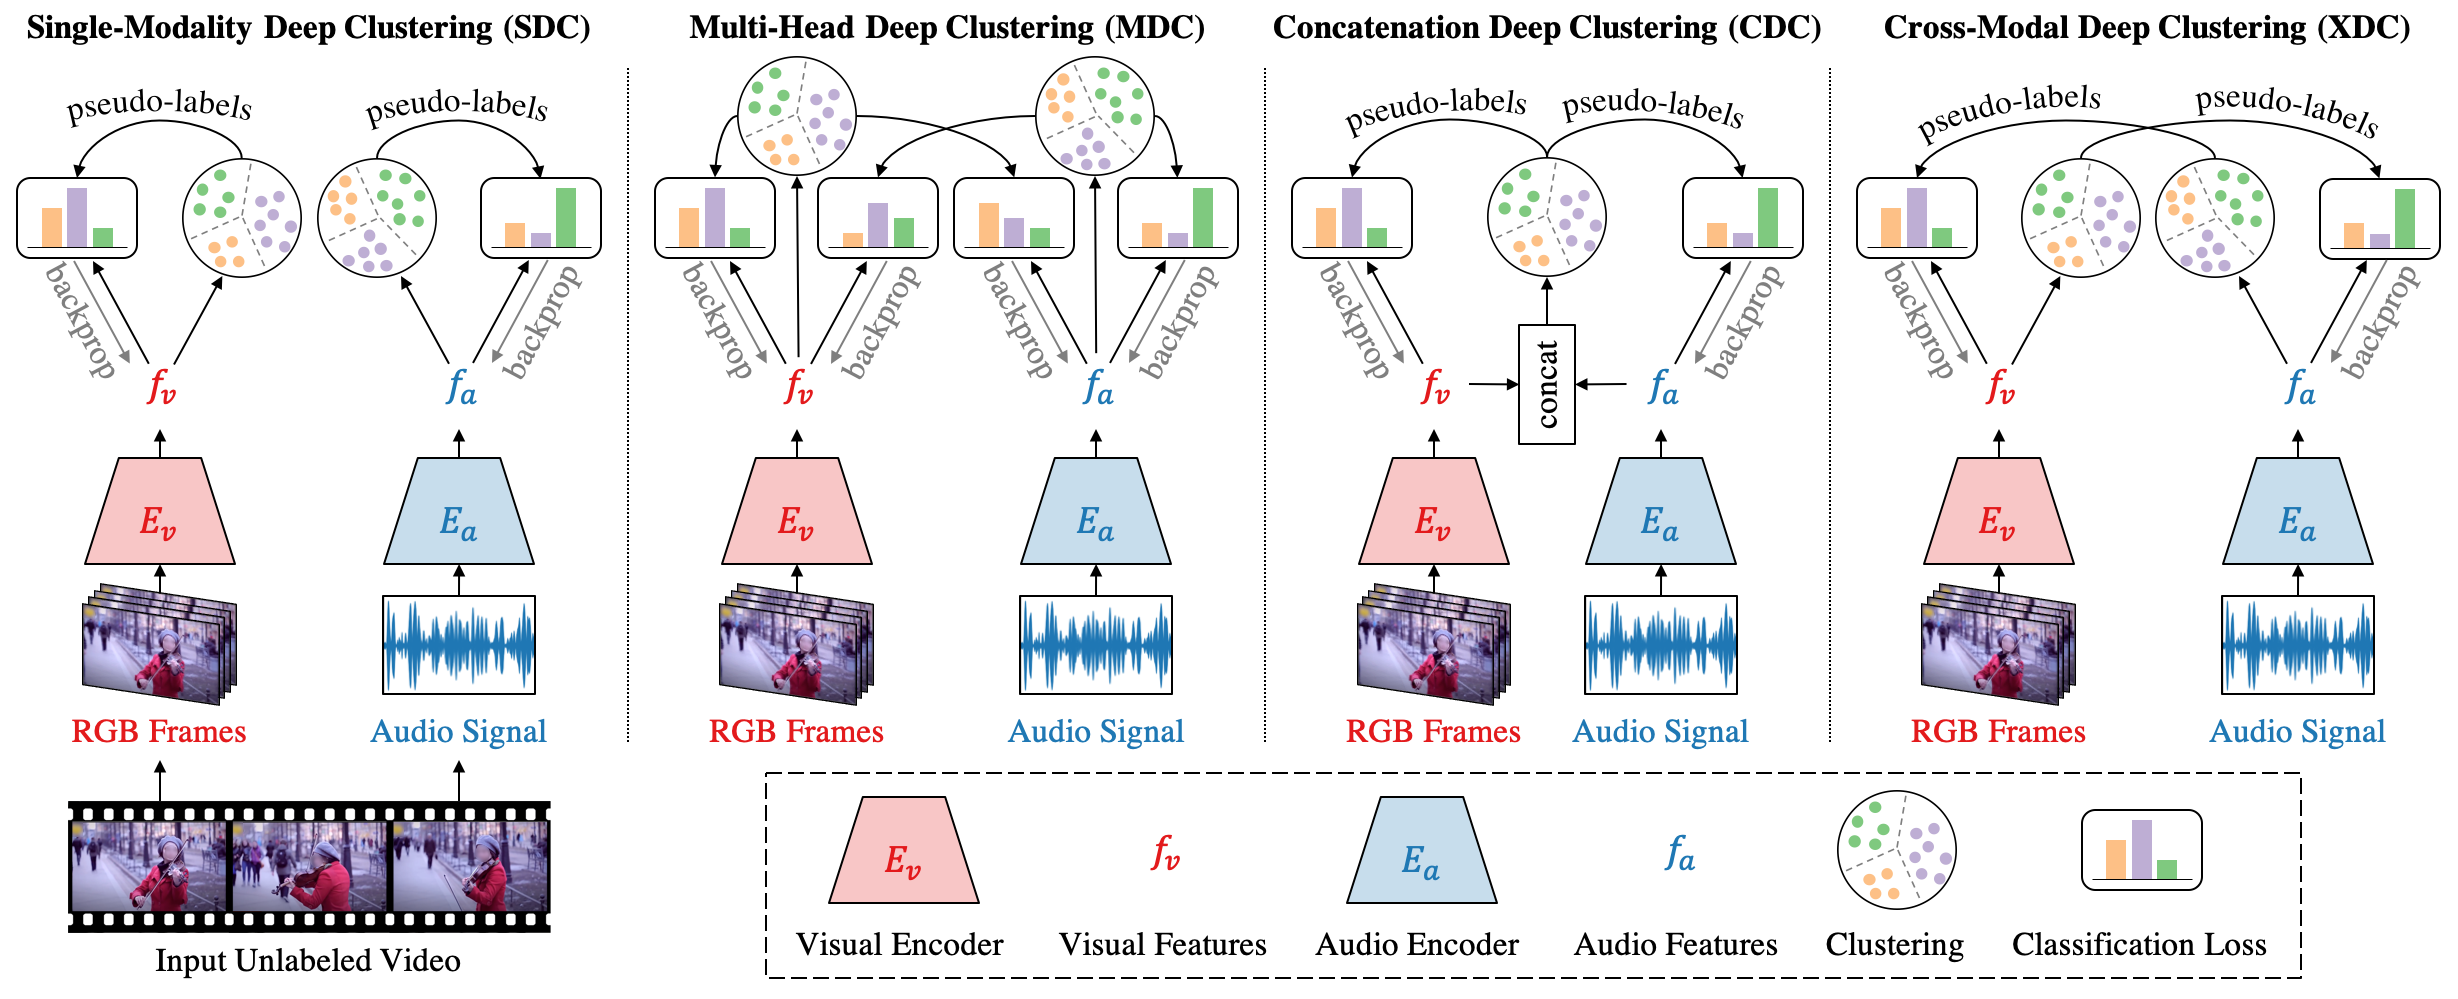 Overview of our framework. We present Single-Modality Deep Clustering (SDC) baseline vs. our three different proposed models: Multi-Head Deep Clustering (MDC), Concatenation Deep Clustering (CDC), and Cross-Modal Deep Clustering (XDC) for multi-modal deep clustering. Unlabeled videos are inputted into the video and audio encoders (E_v and E_a) to produce visual and audio features (f_v and f_a). These features, or the concatenation of them, are clustered using k-means. The cluster assignments are then used as pseudo-labels to train the two encoders. The process is started with randomly-initialized encoders, then alternates between clustering to generate pseudo-labels and training to improve the encoders. The four models employ different ways to cluster features and generate self-supervision signals for learning the visual and audio representations.